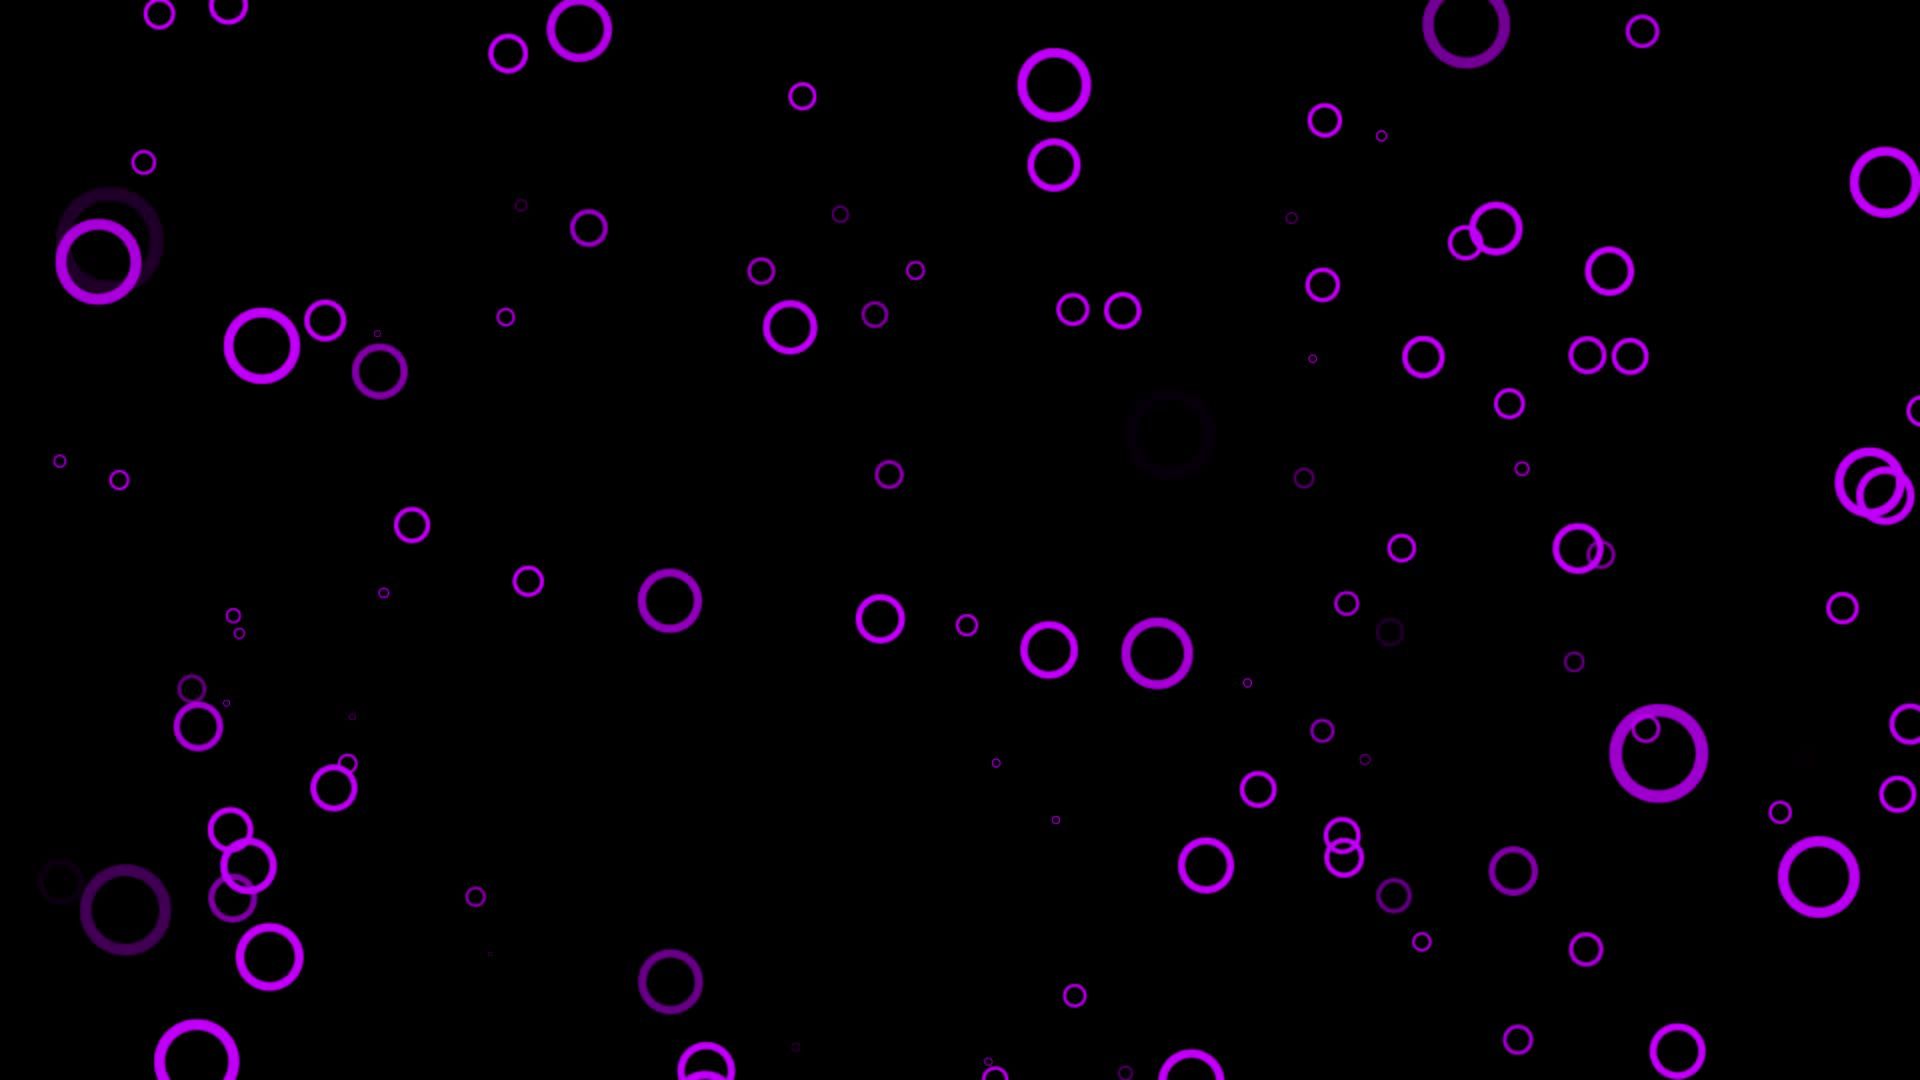 A purple and black background with many circles - Bubbles